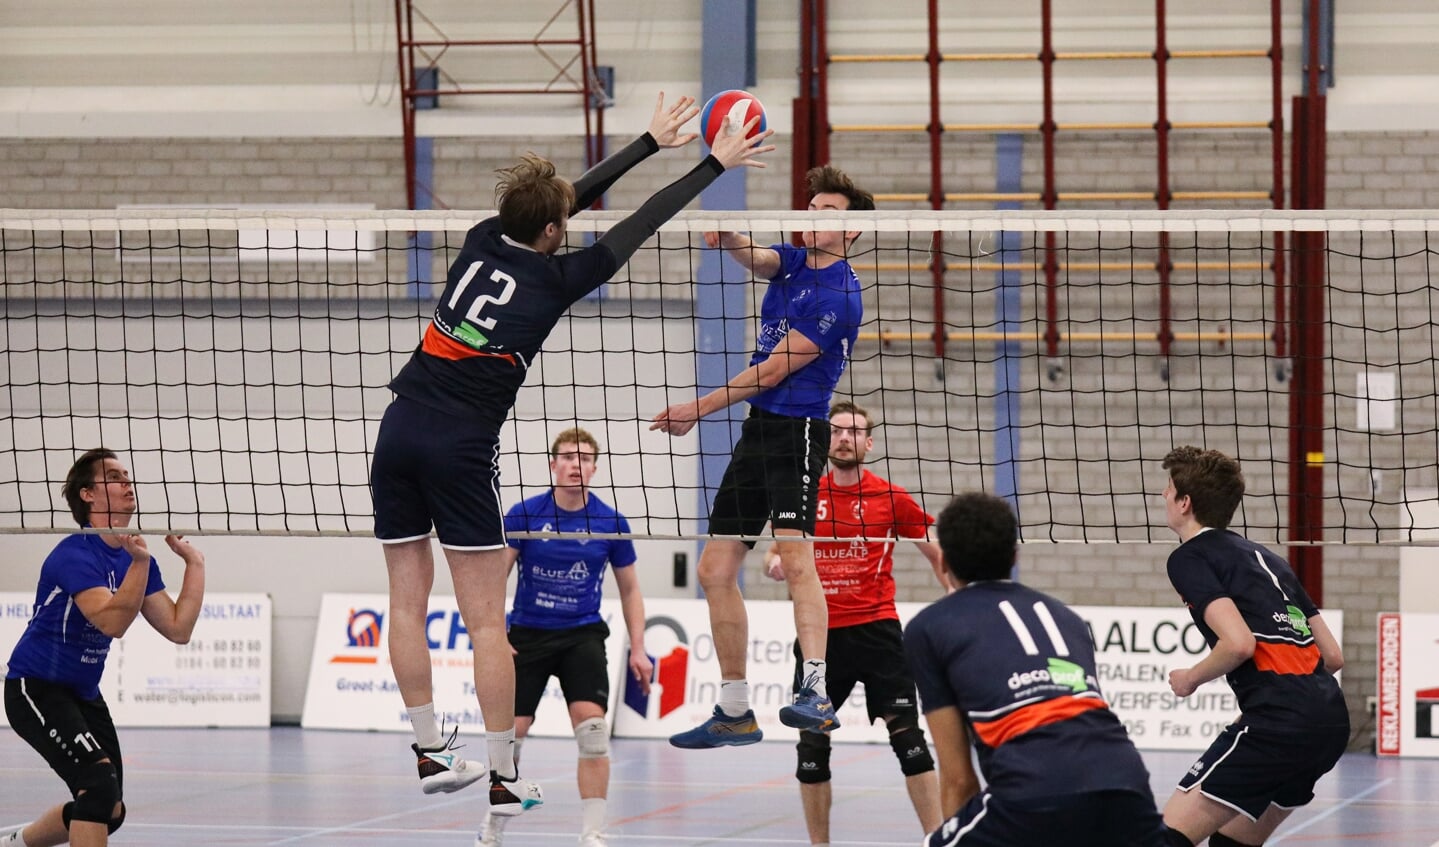 • VC WIK - Next Volley (1-3).